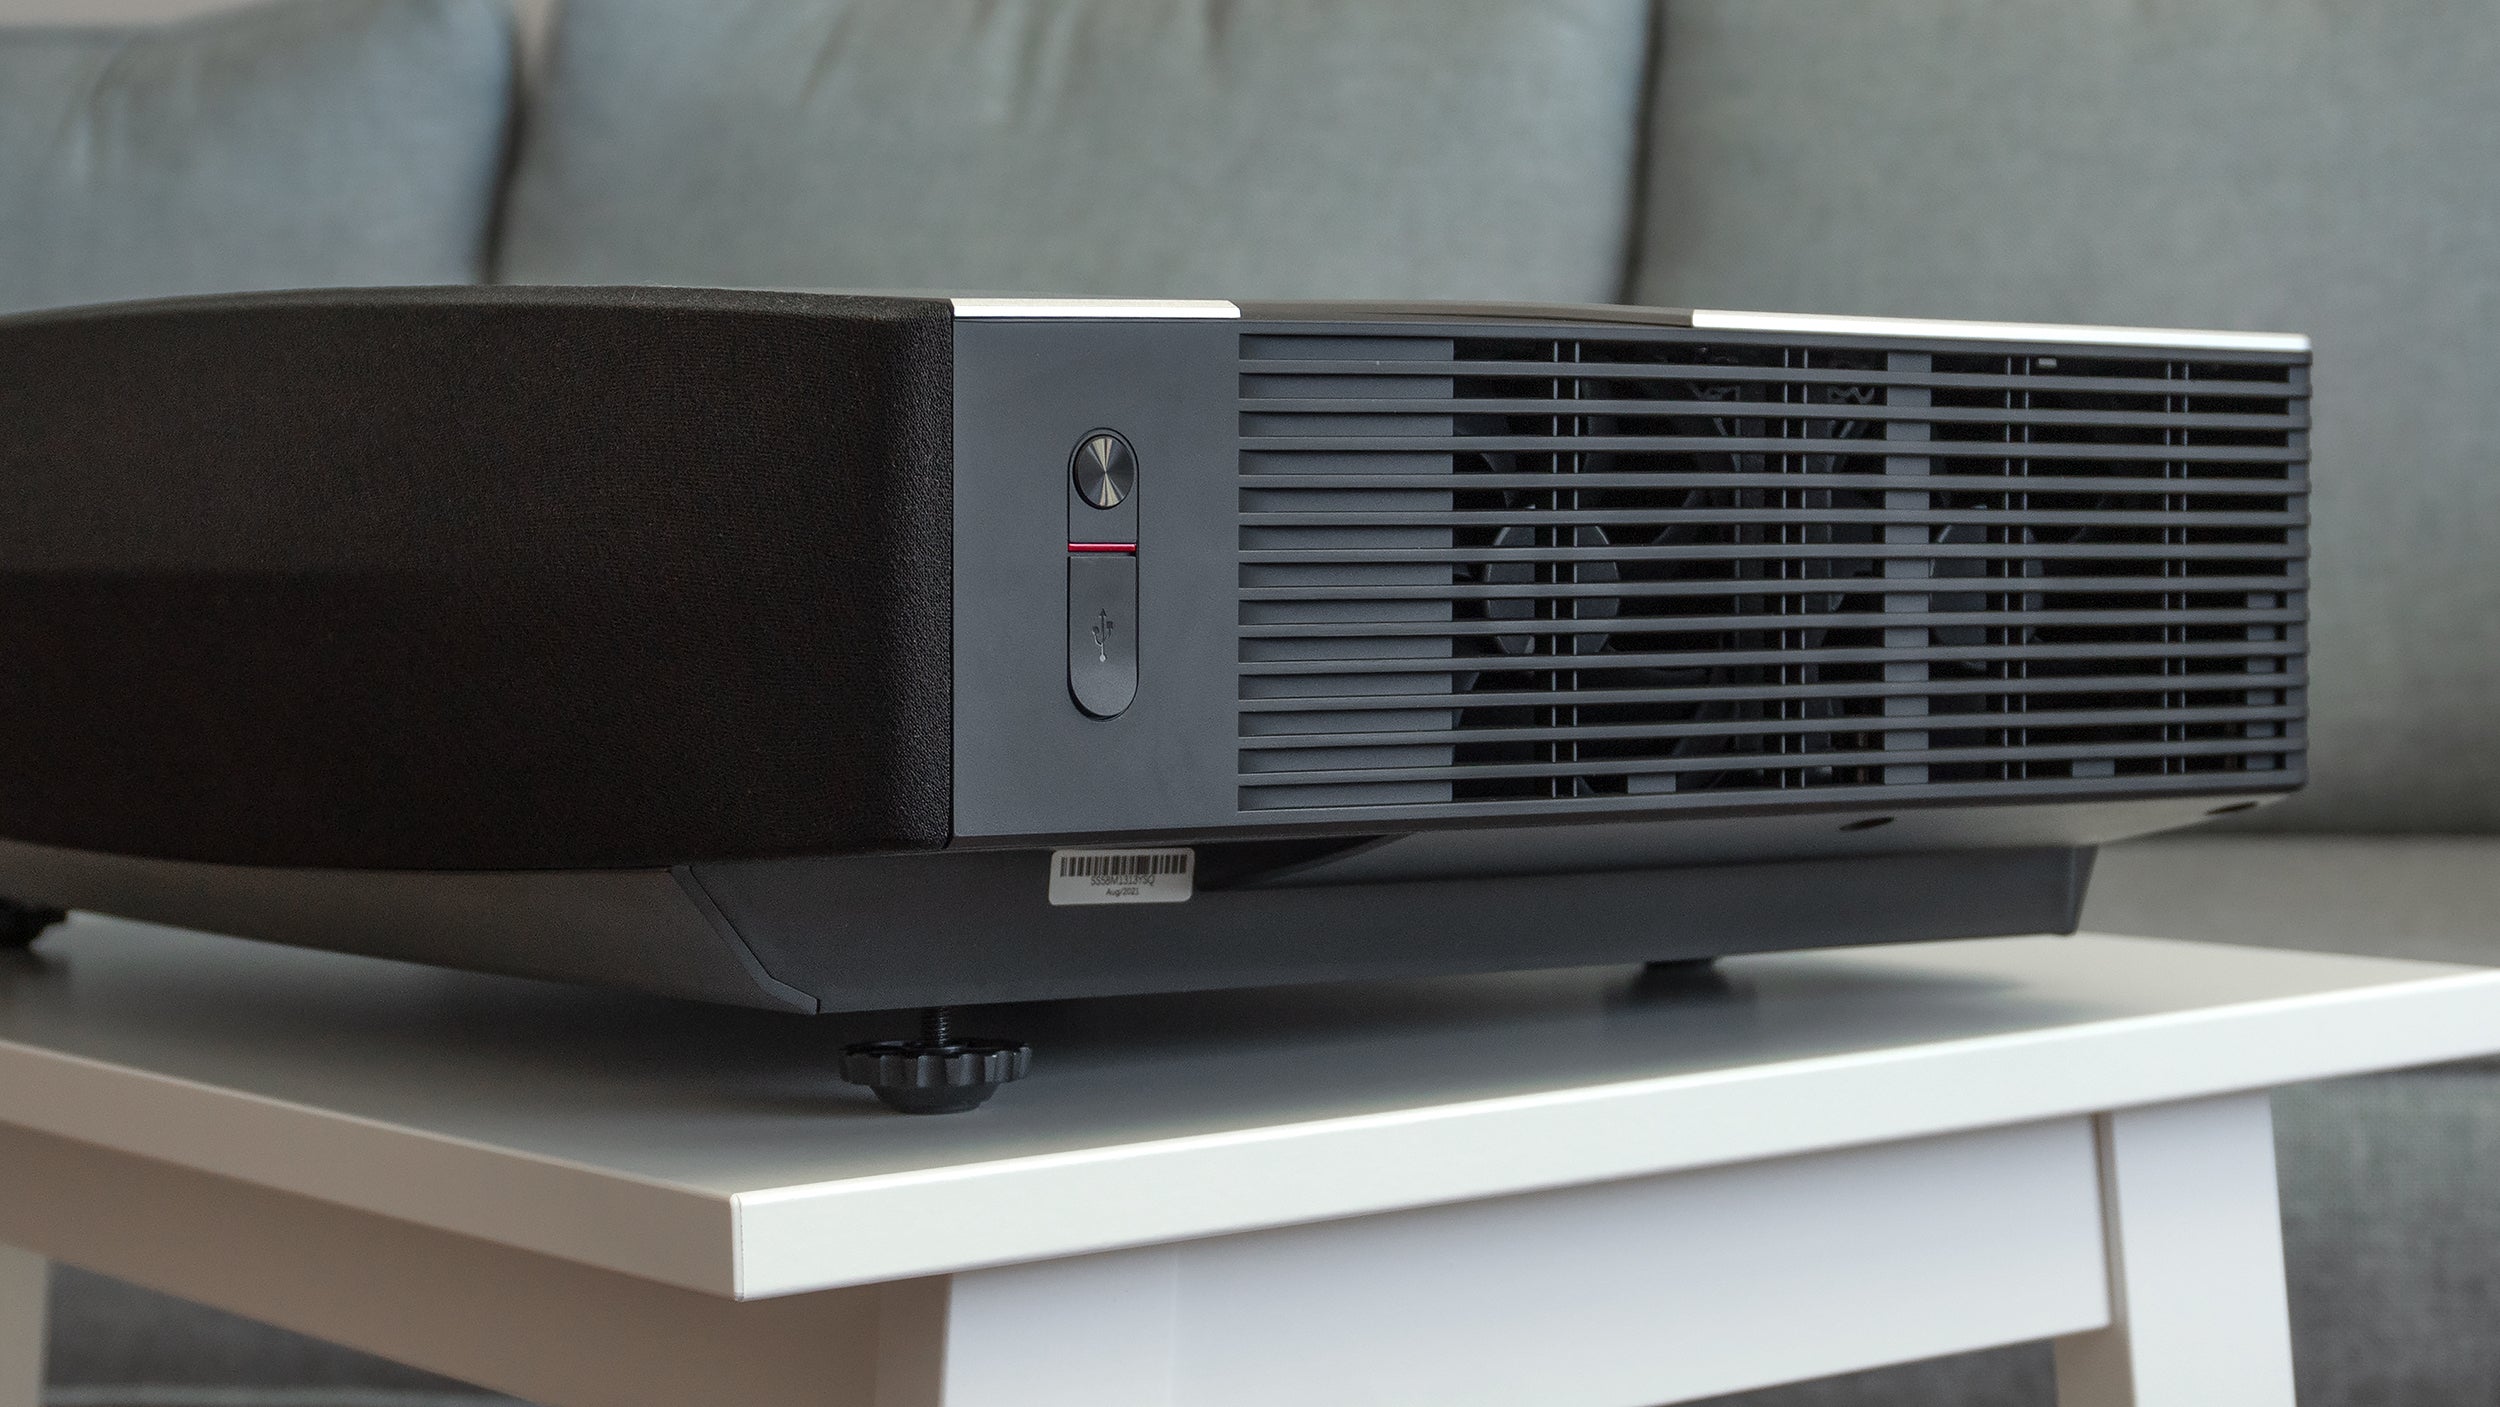 The Aura uses some serious cooling fans, but they're surprisingly quiet, and really only ever heard when the projector is powering down and quickly cooling itself. (Photo: Andrew Liszewski - Gizmodo)